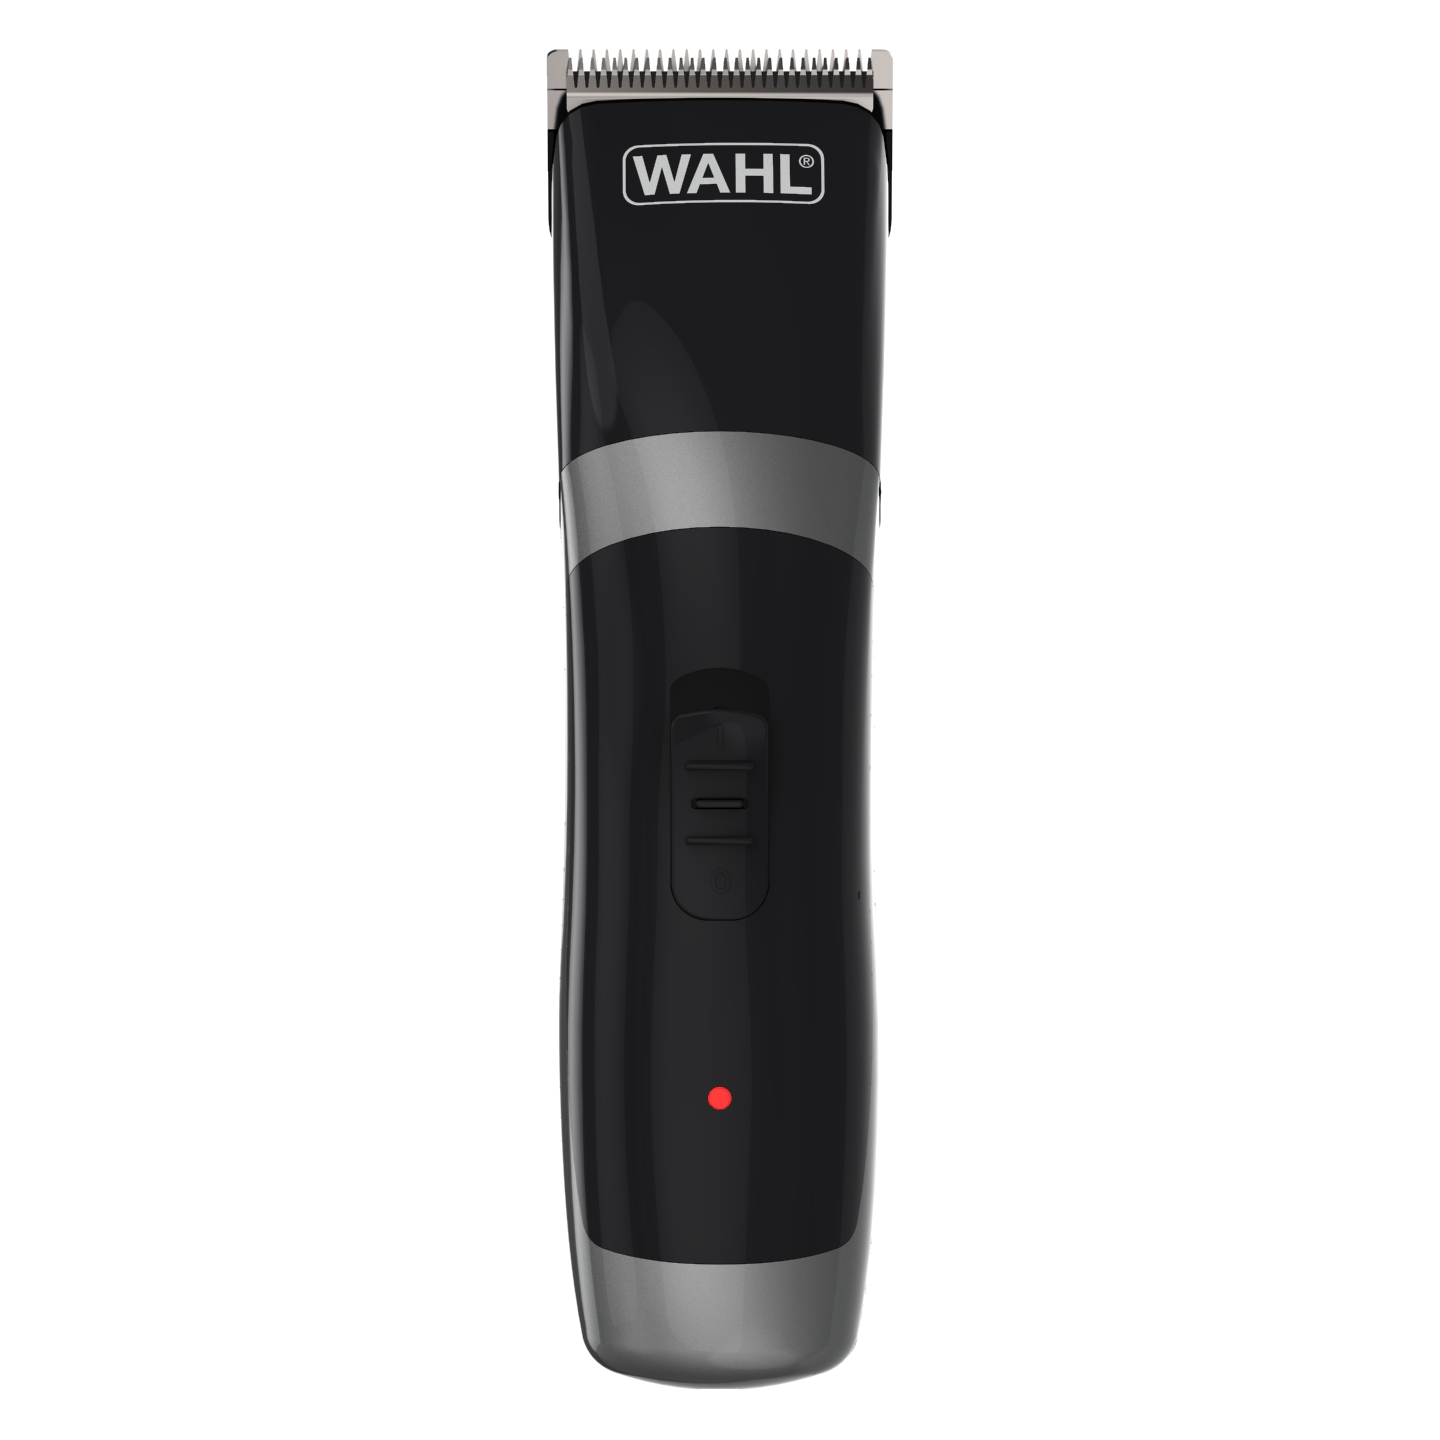 professional hair trimmer uk